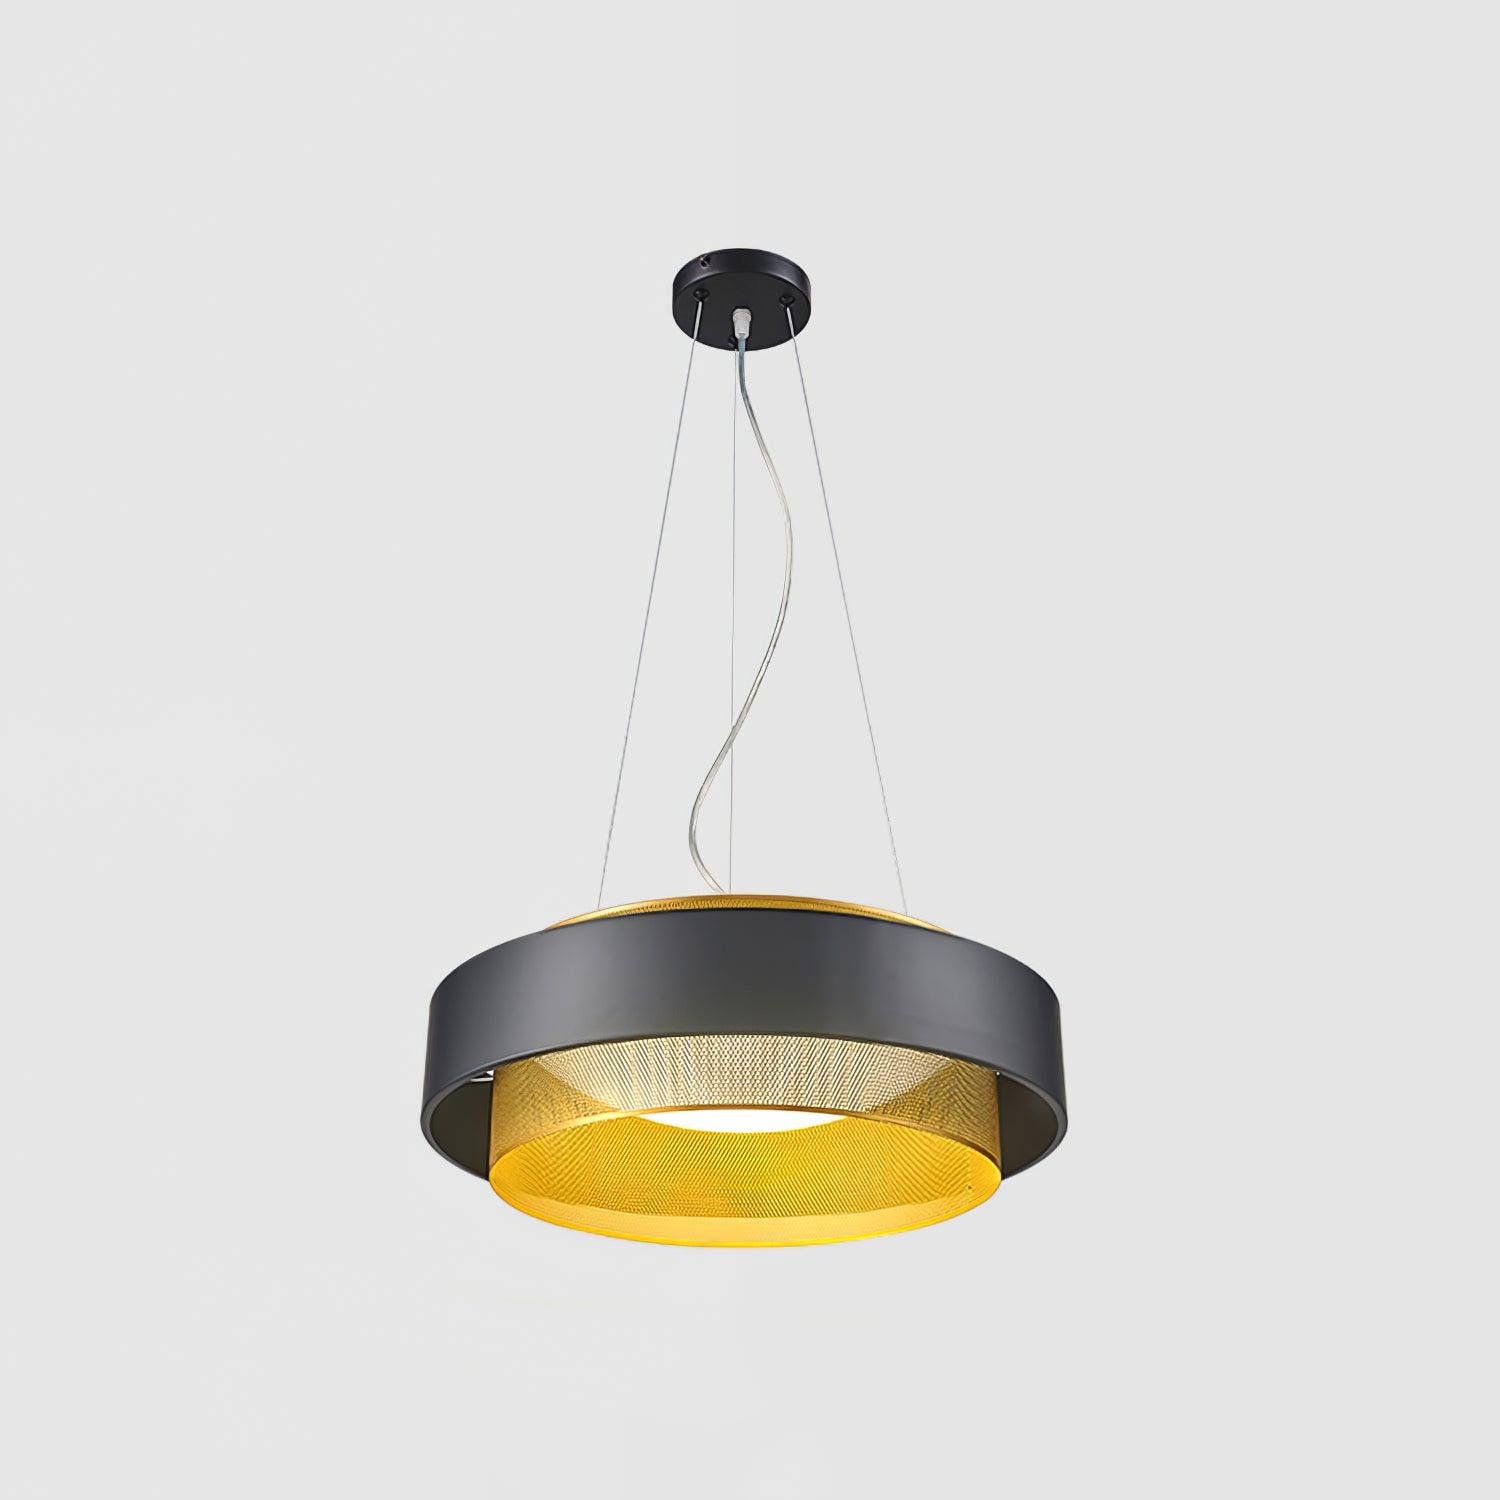 Gold and Black Nolan Pendant Light with Three-Color Changing Feature, Dimensions: Diameter 24.4" x Height 5.9" (62cm x 15cm)